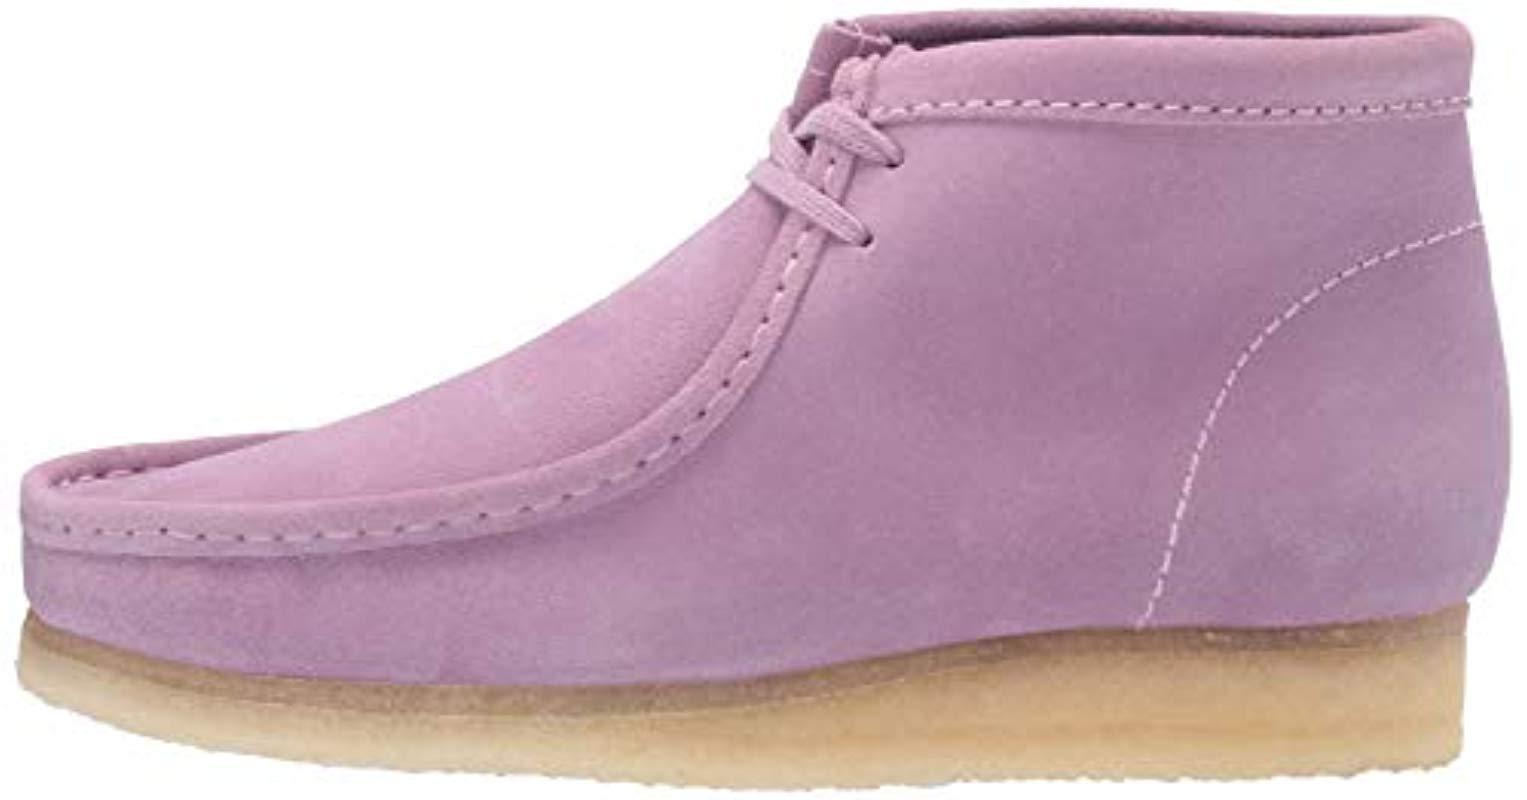 Clarks Leather Wallabee Boot Chukka in Lavender Suede (Purple) for Men |  Lyst